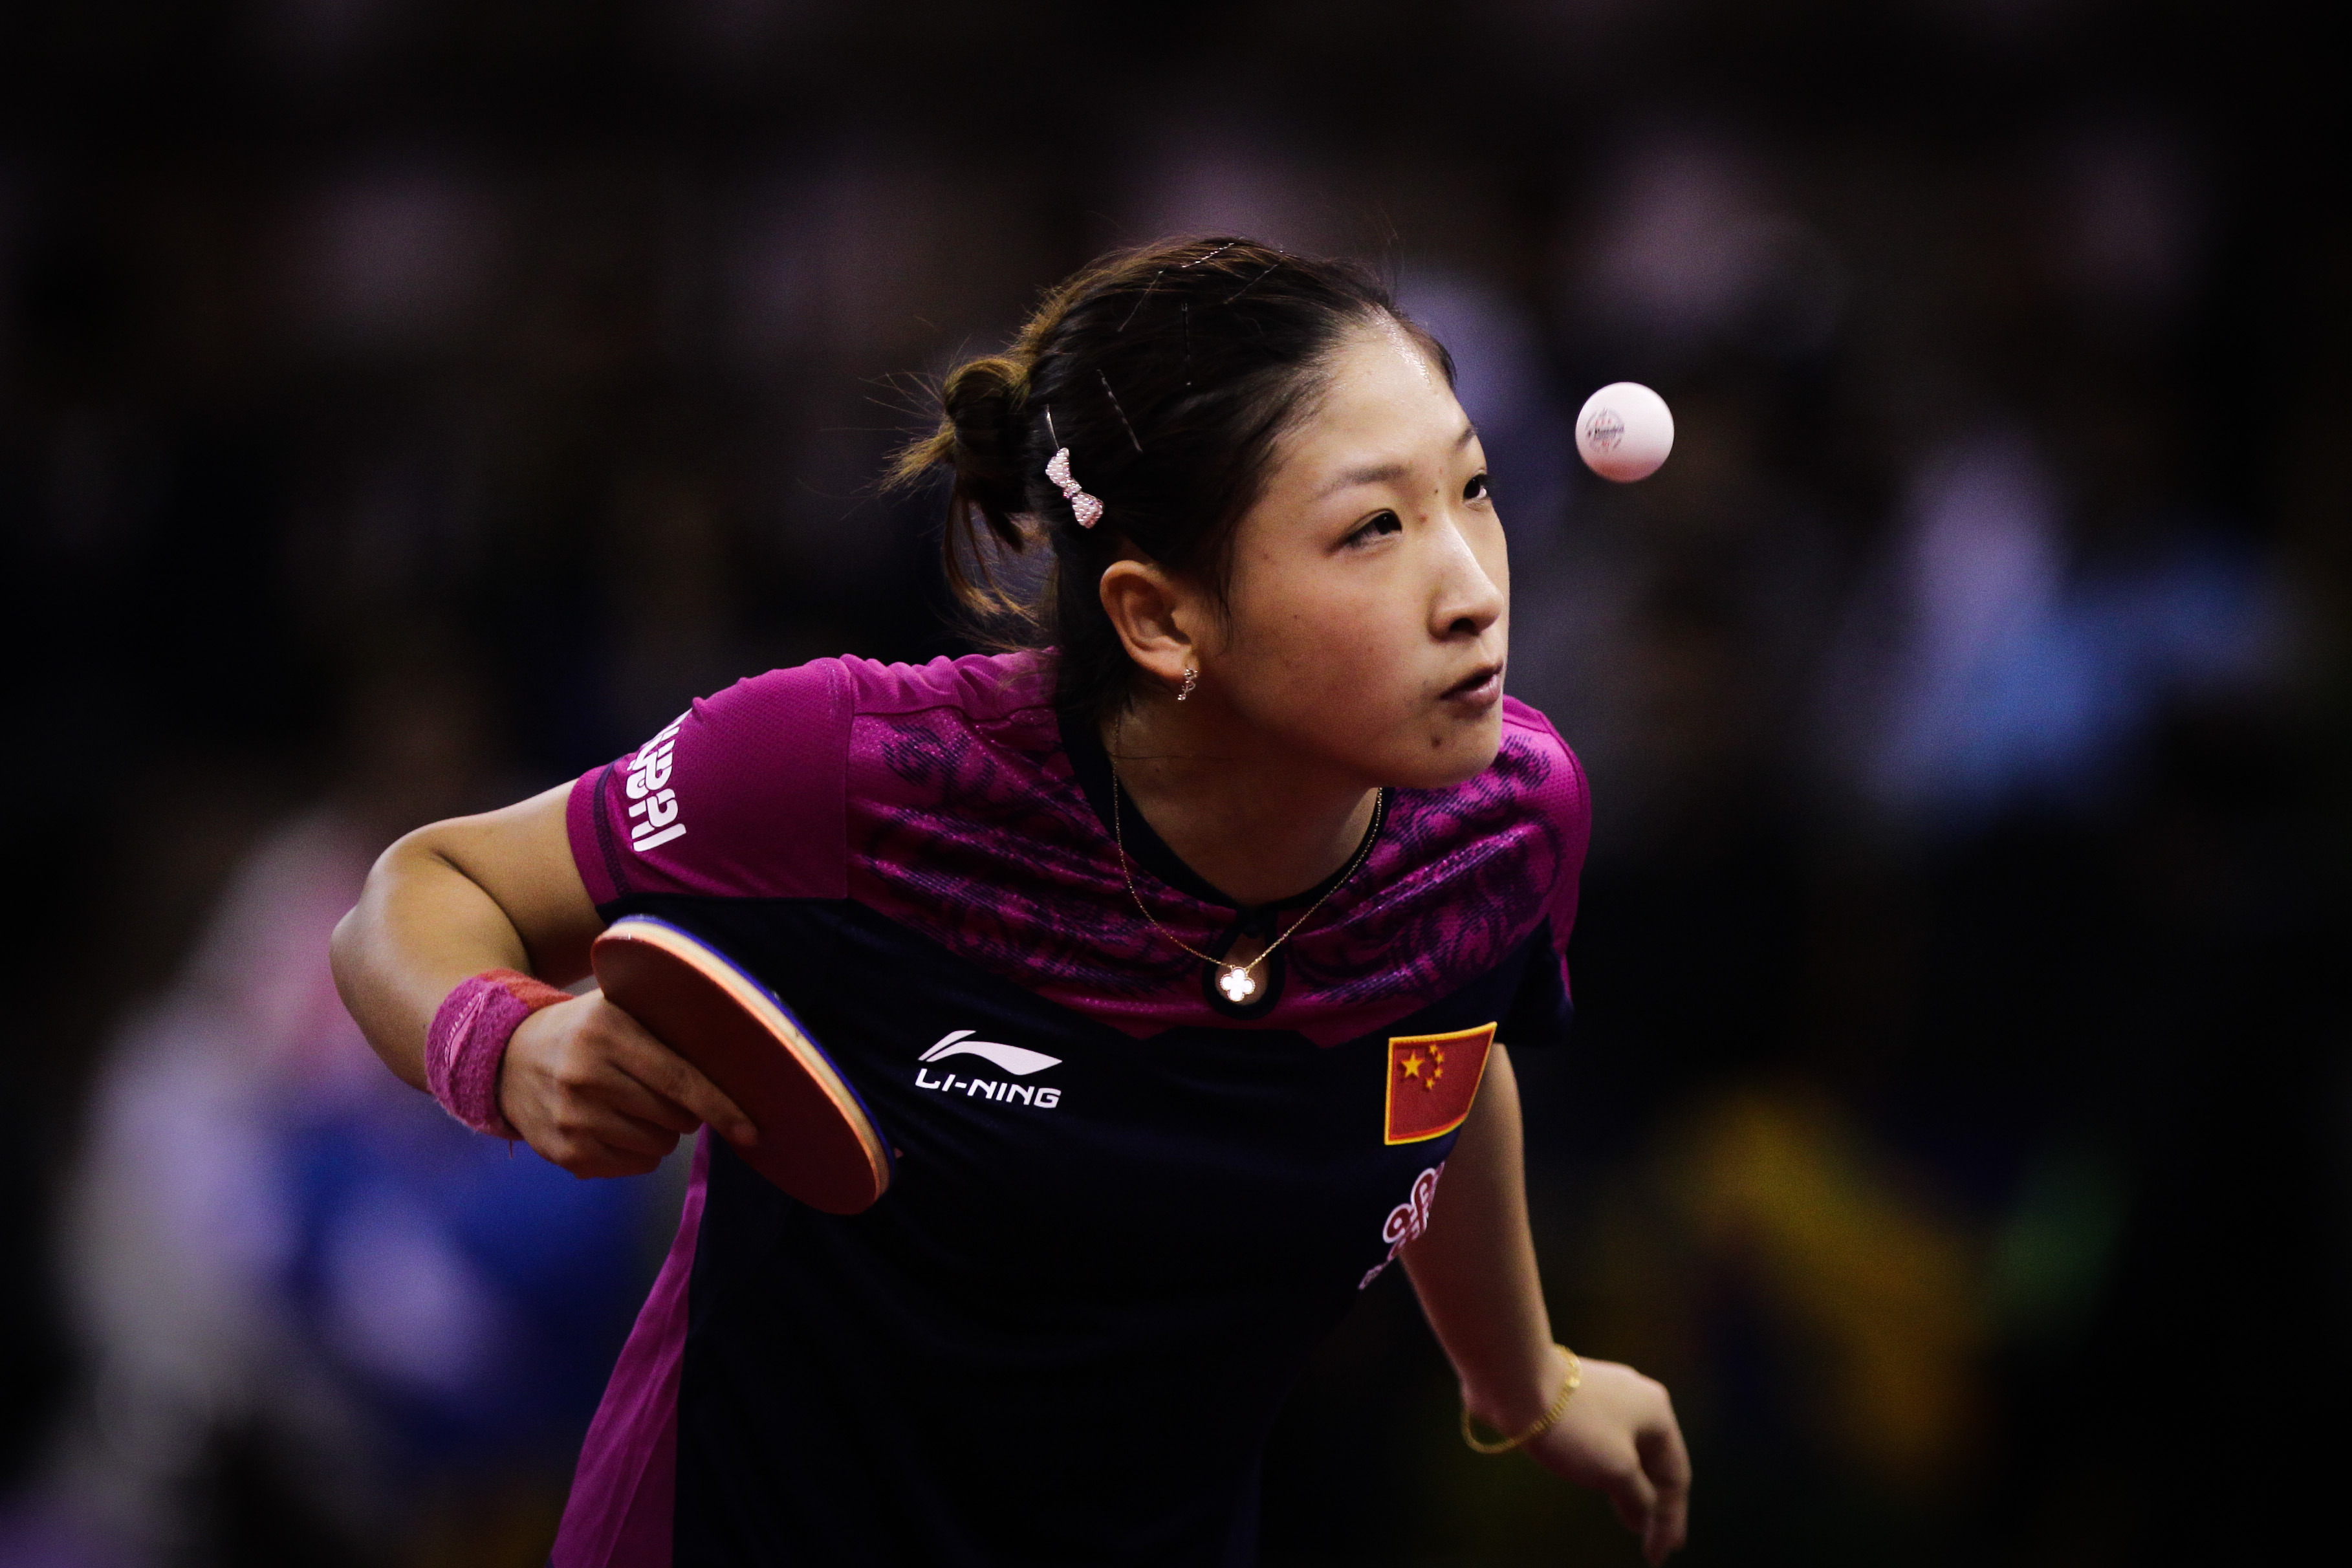 China's Liu Shiwen has won 15 singles titles but is still looking for her first world championship crown. Photo: Xinhua